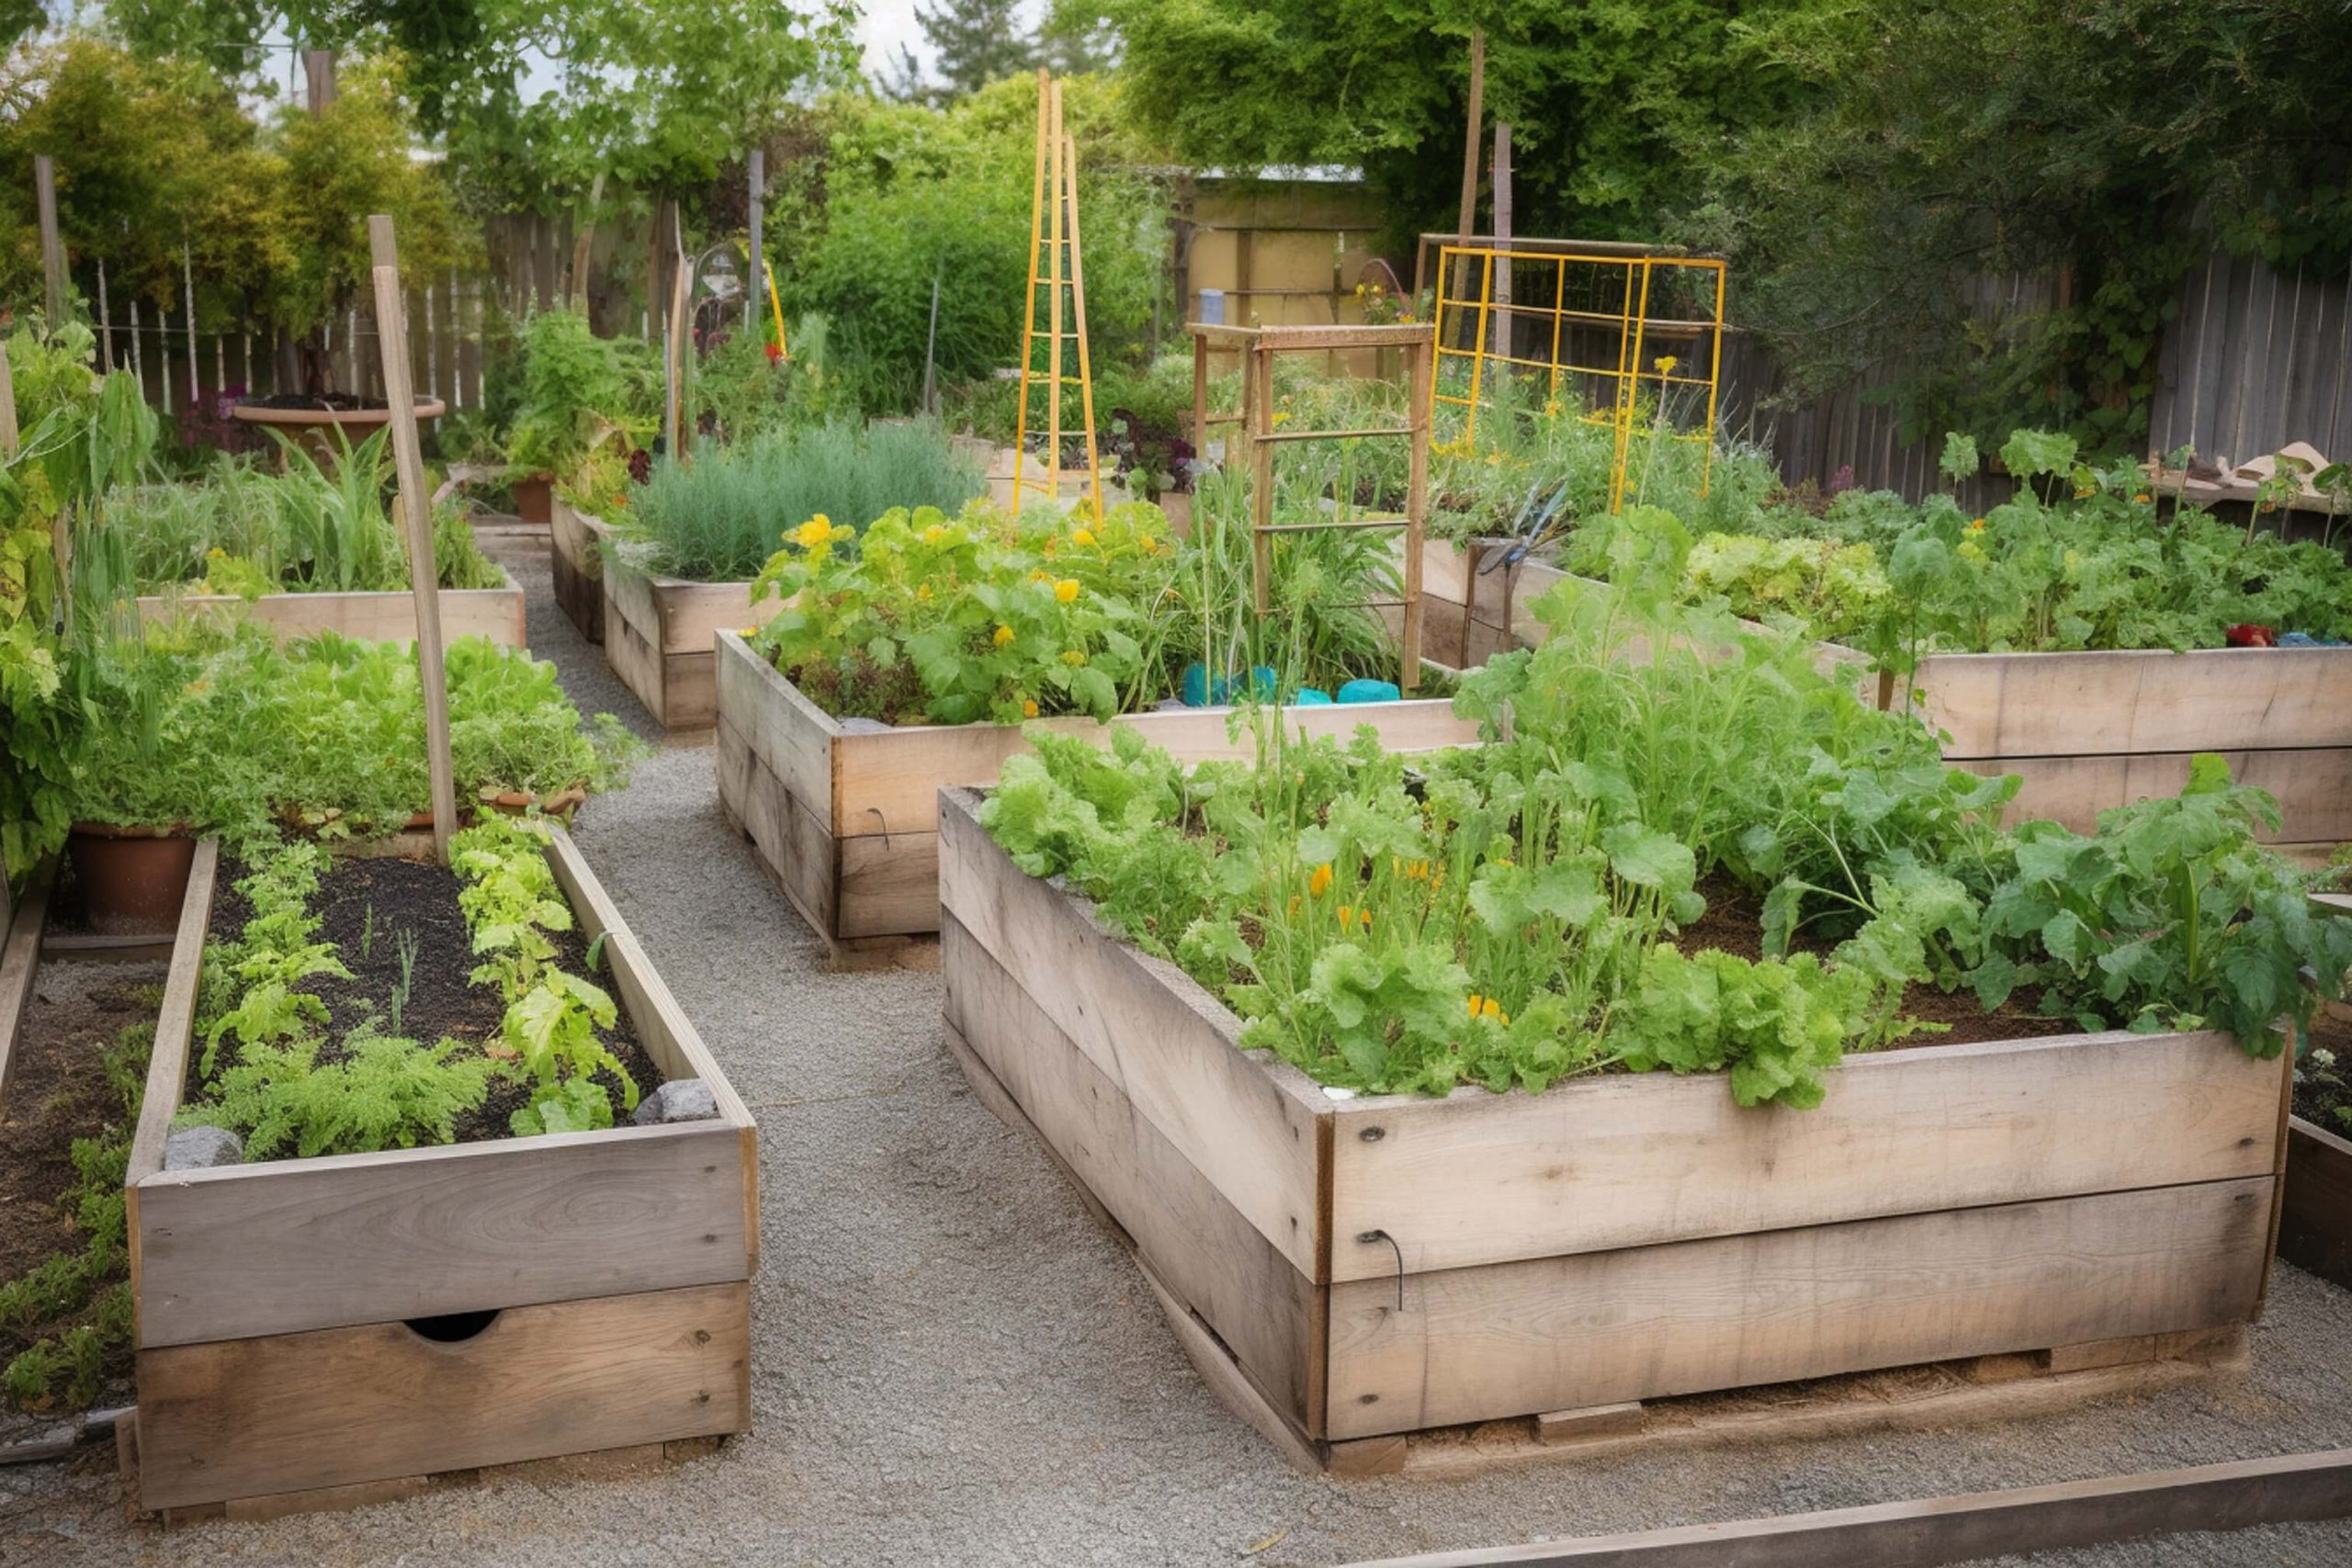 A photo of raised garden beds with aromatics and vegetables